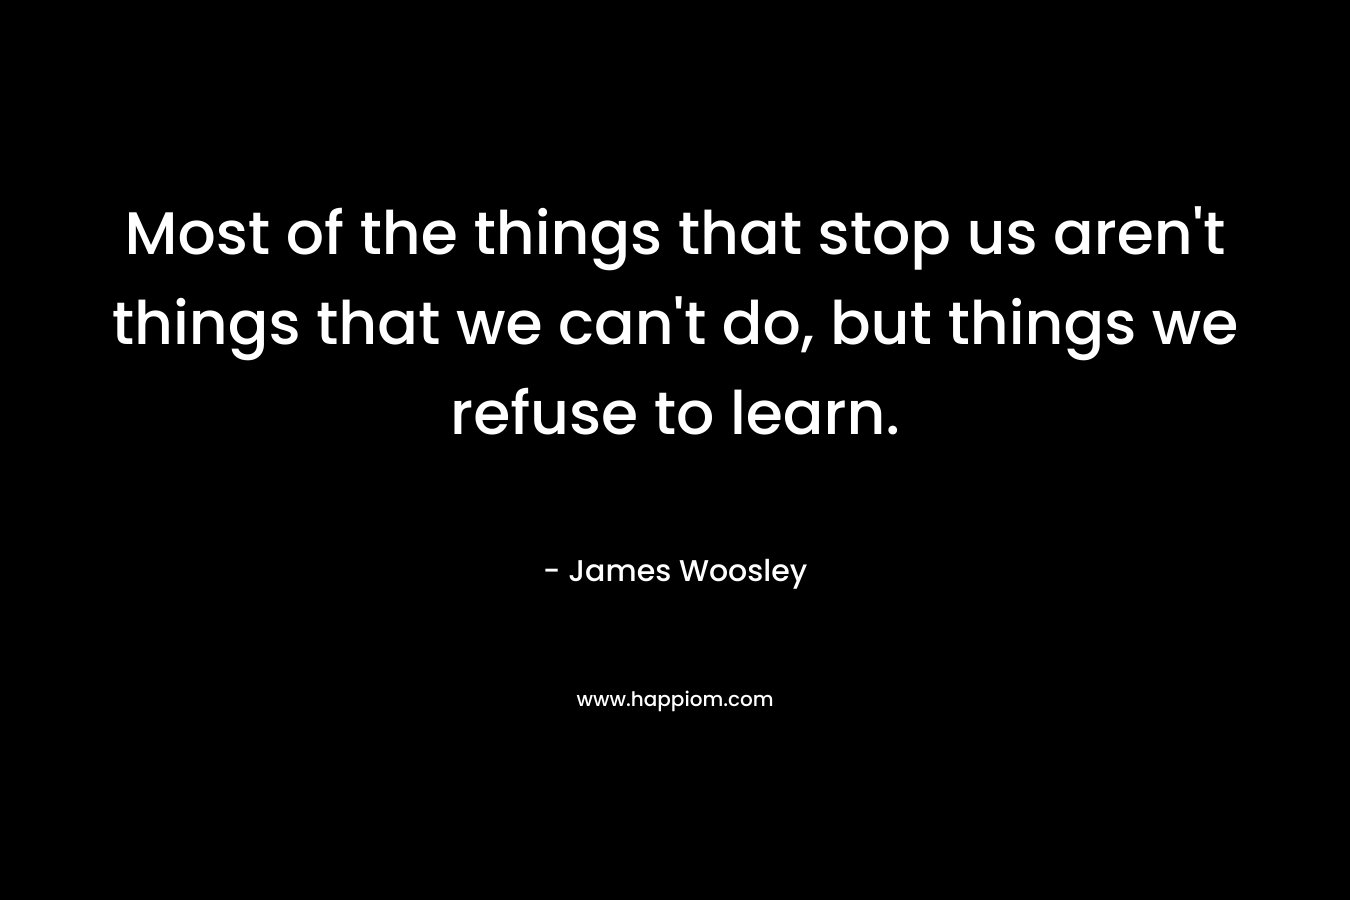 Most of the things that stop us aren't things that we can't do, but things we refuse to learn.